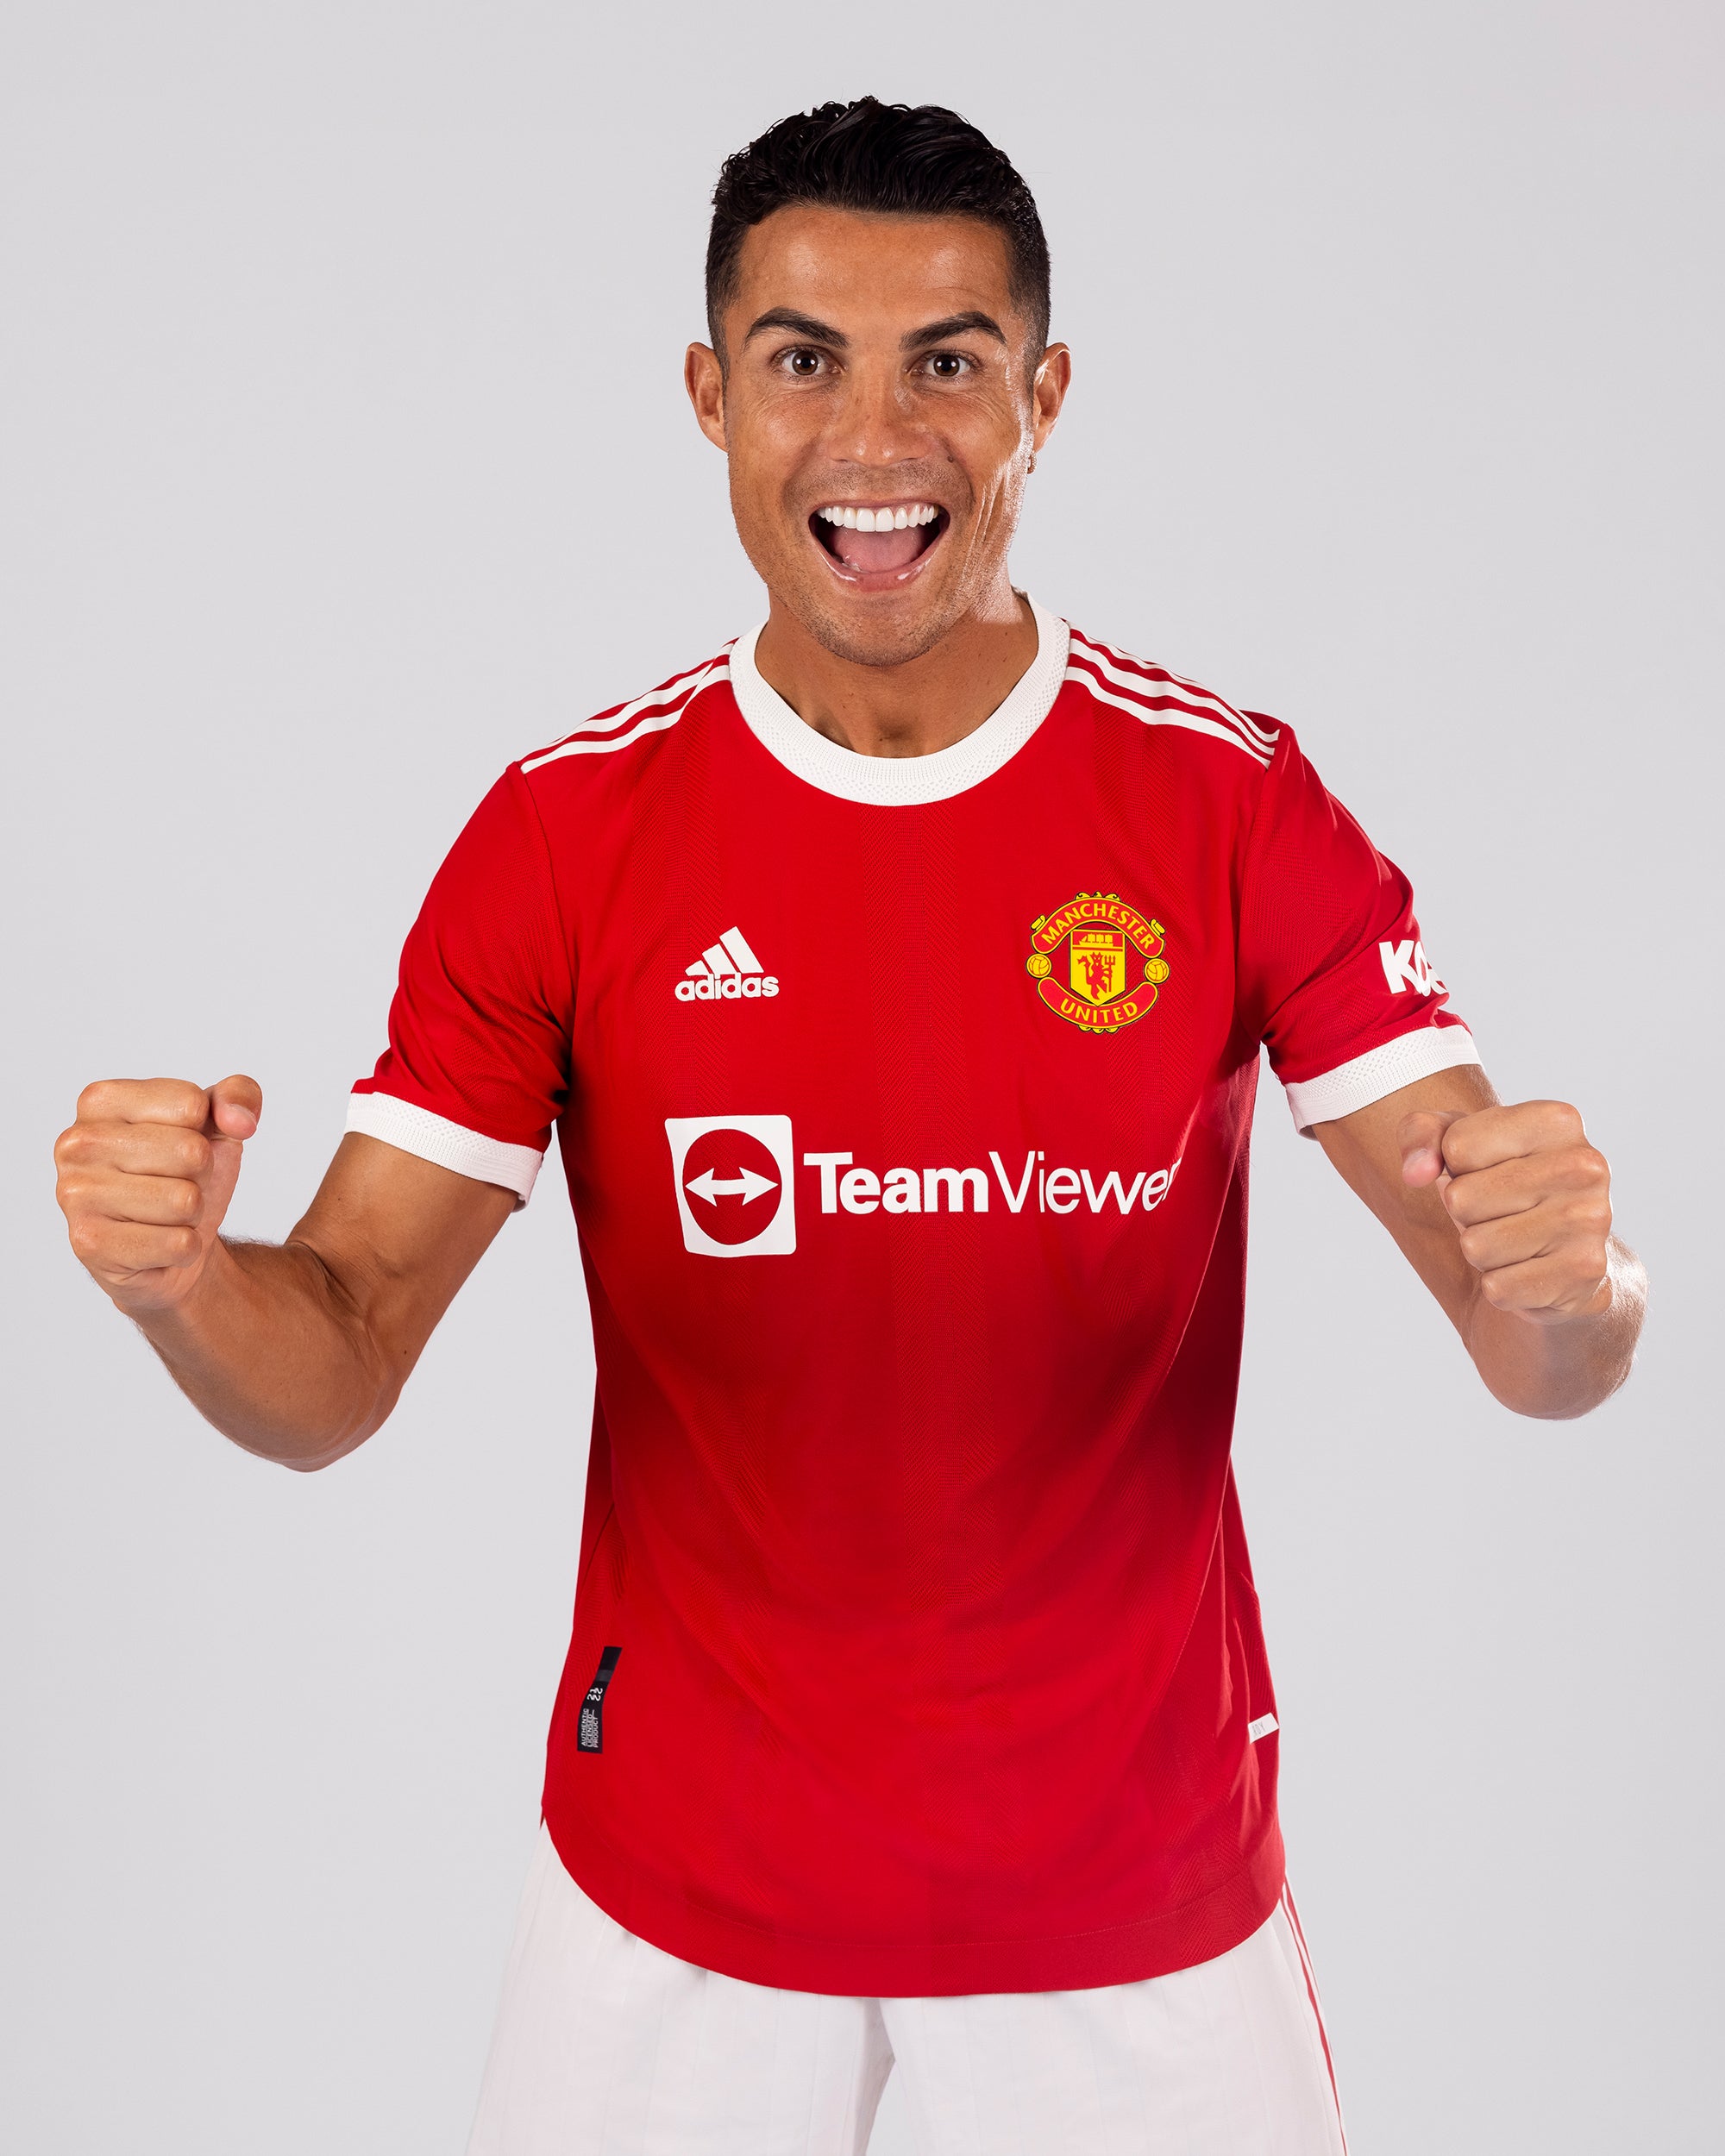 Cristiano Ronaldo of Manchester United poses after signing for the club